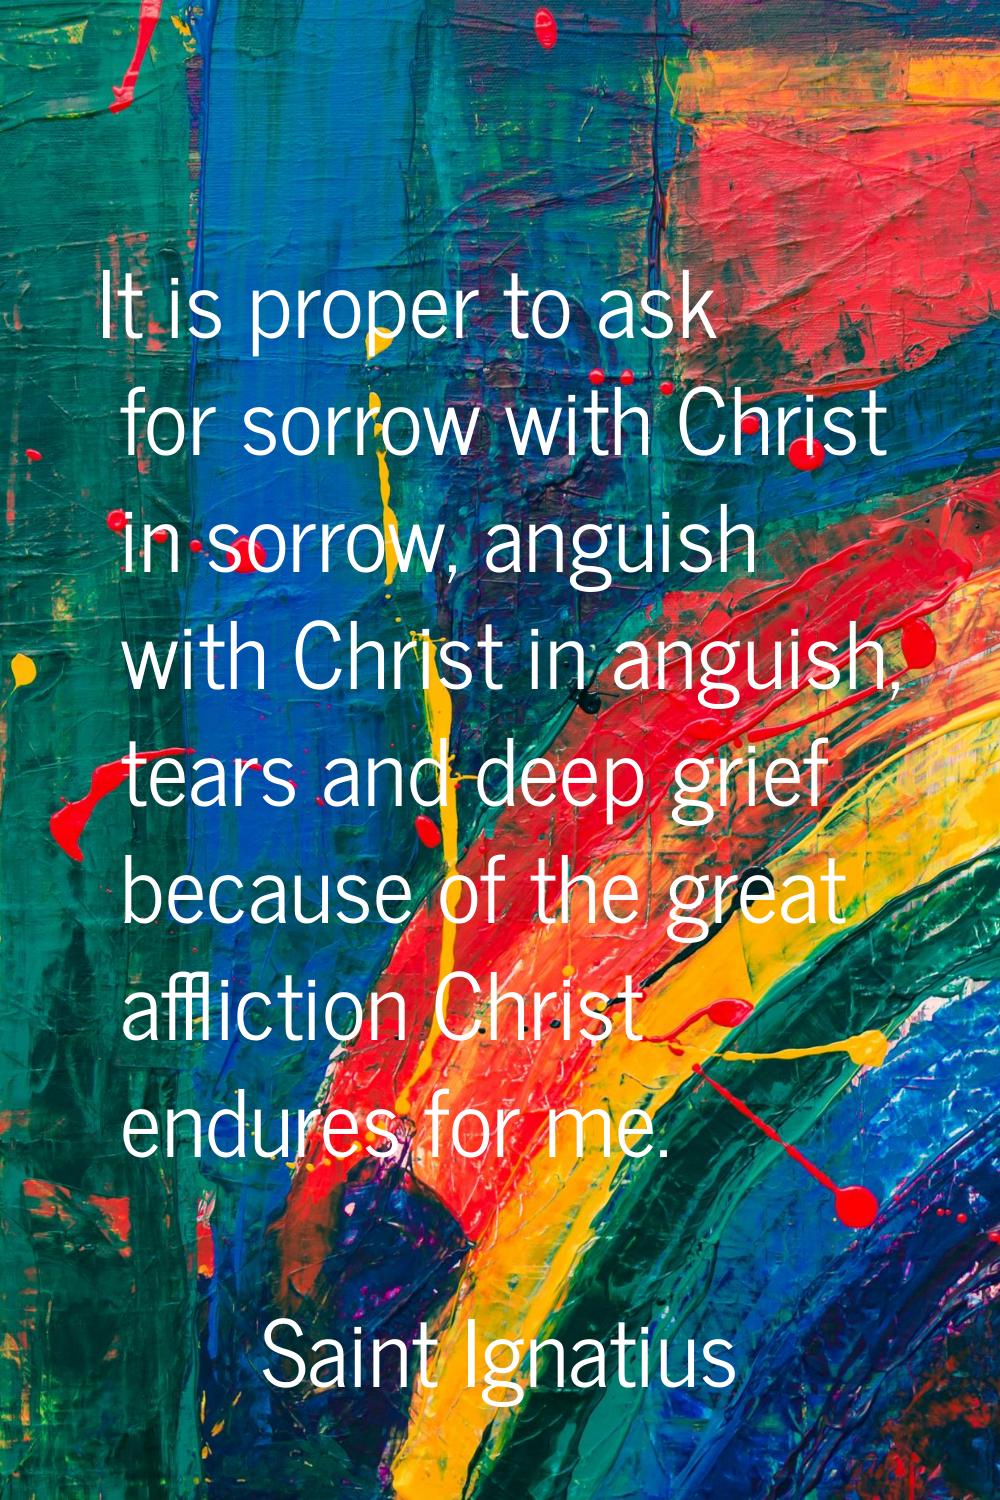 It is proper to ask for sorrow with Christ in sorrow, anguish with Christ in anguish, tears and dee